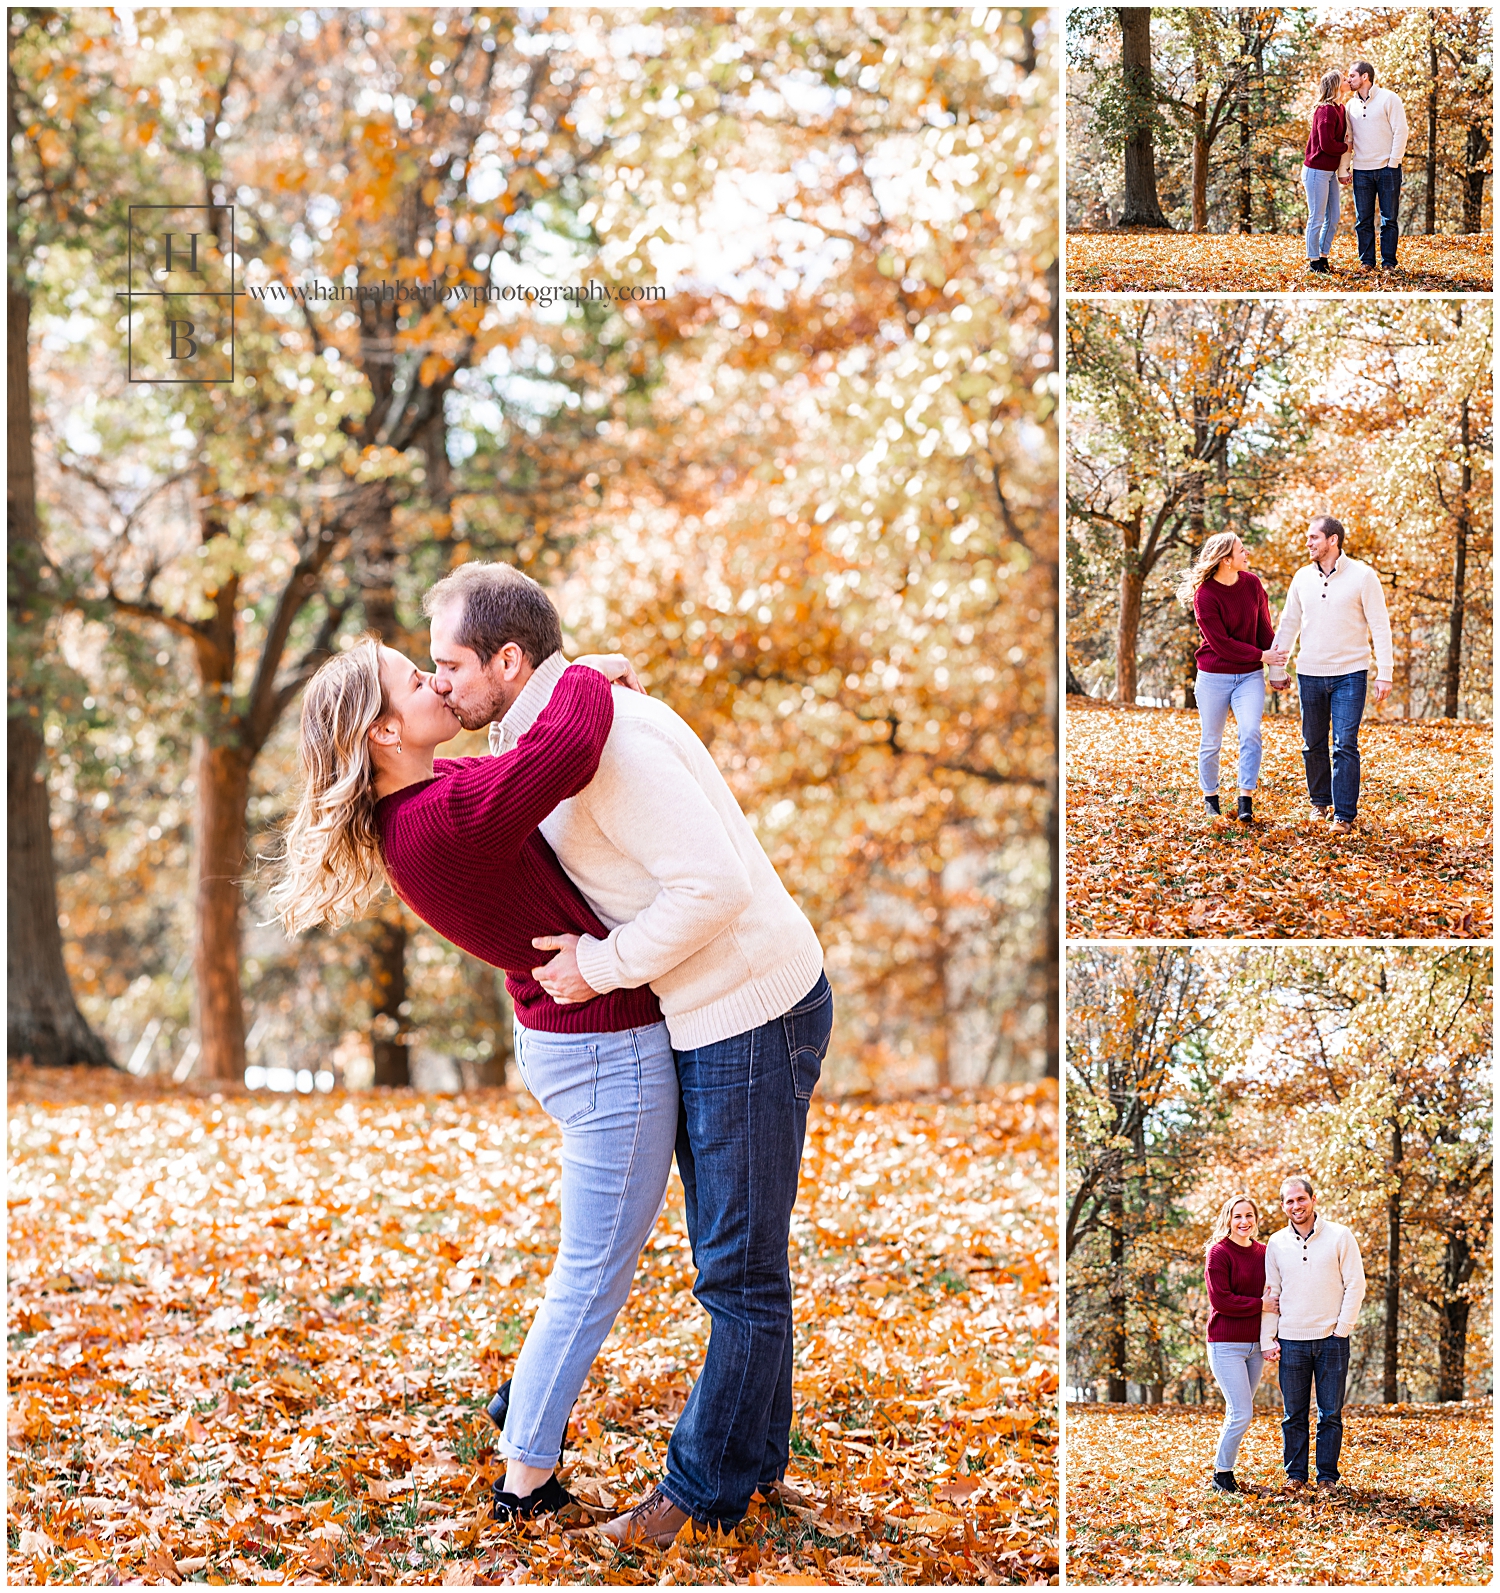 Man in white sweater kisses woman in red sweater in orange fall leaf forest